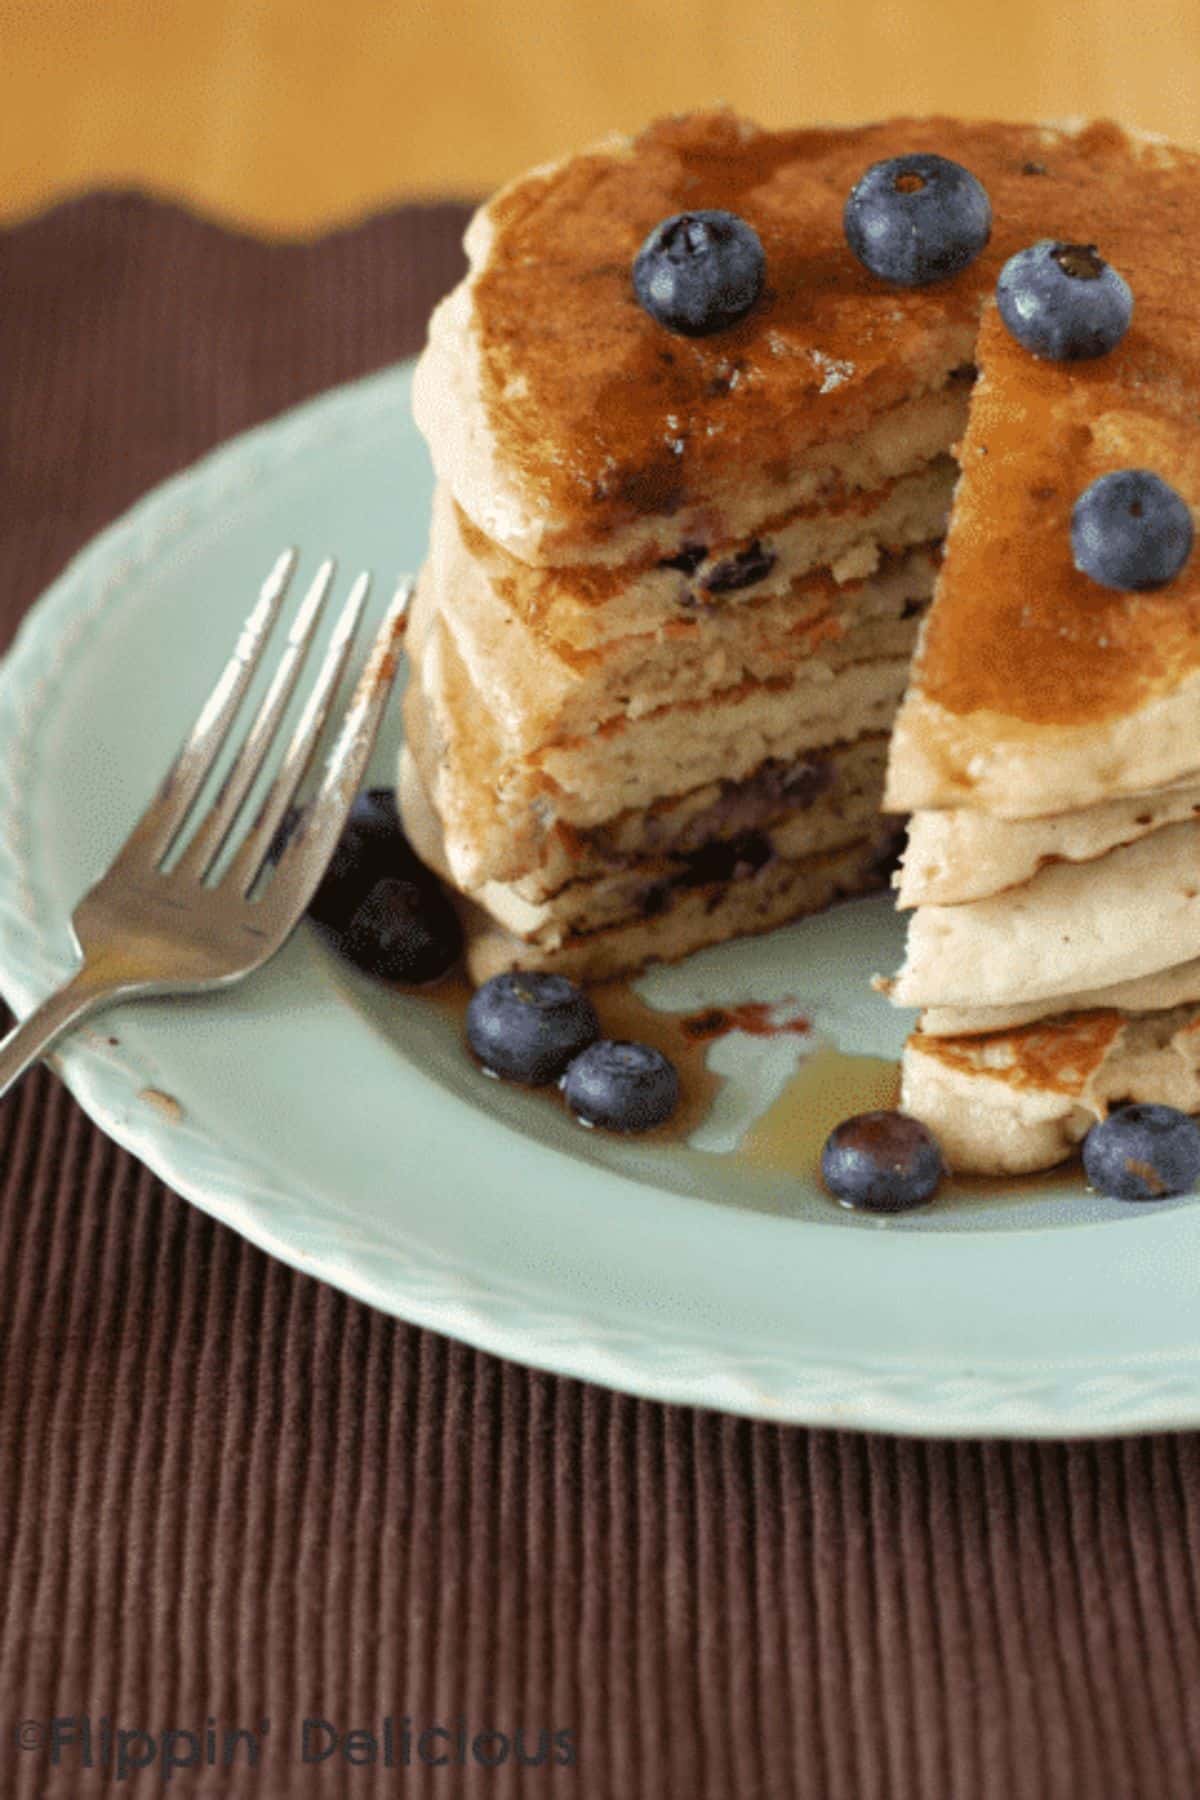 A pile of Gluten-free Blueberry Banana Pancakes on a blue plate with a fork.